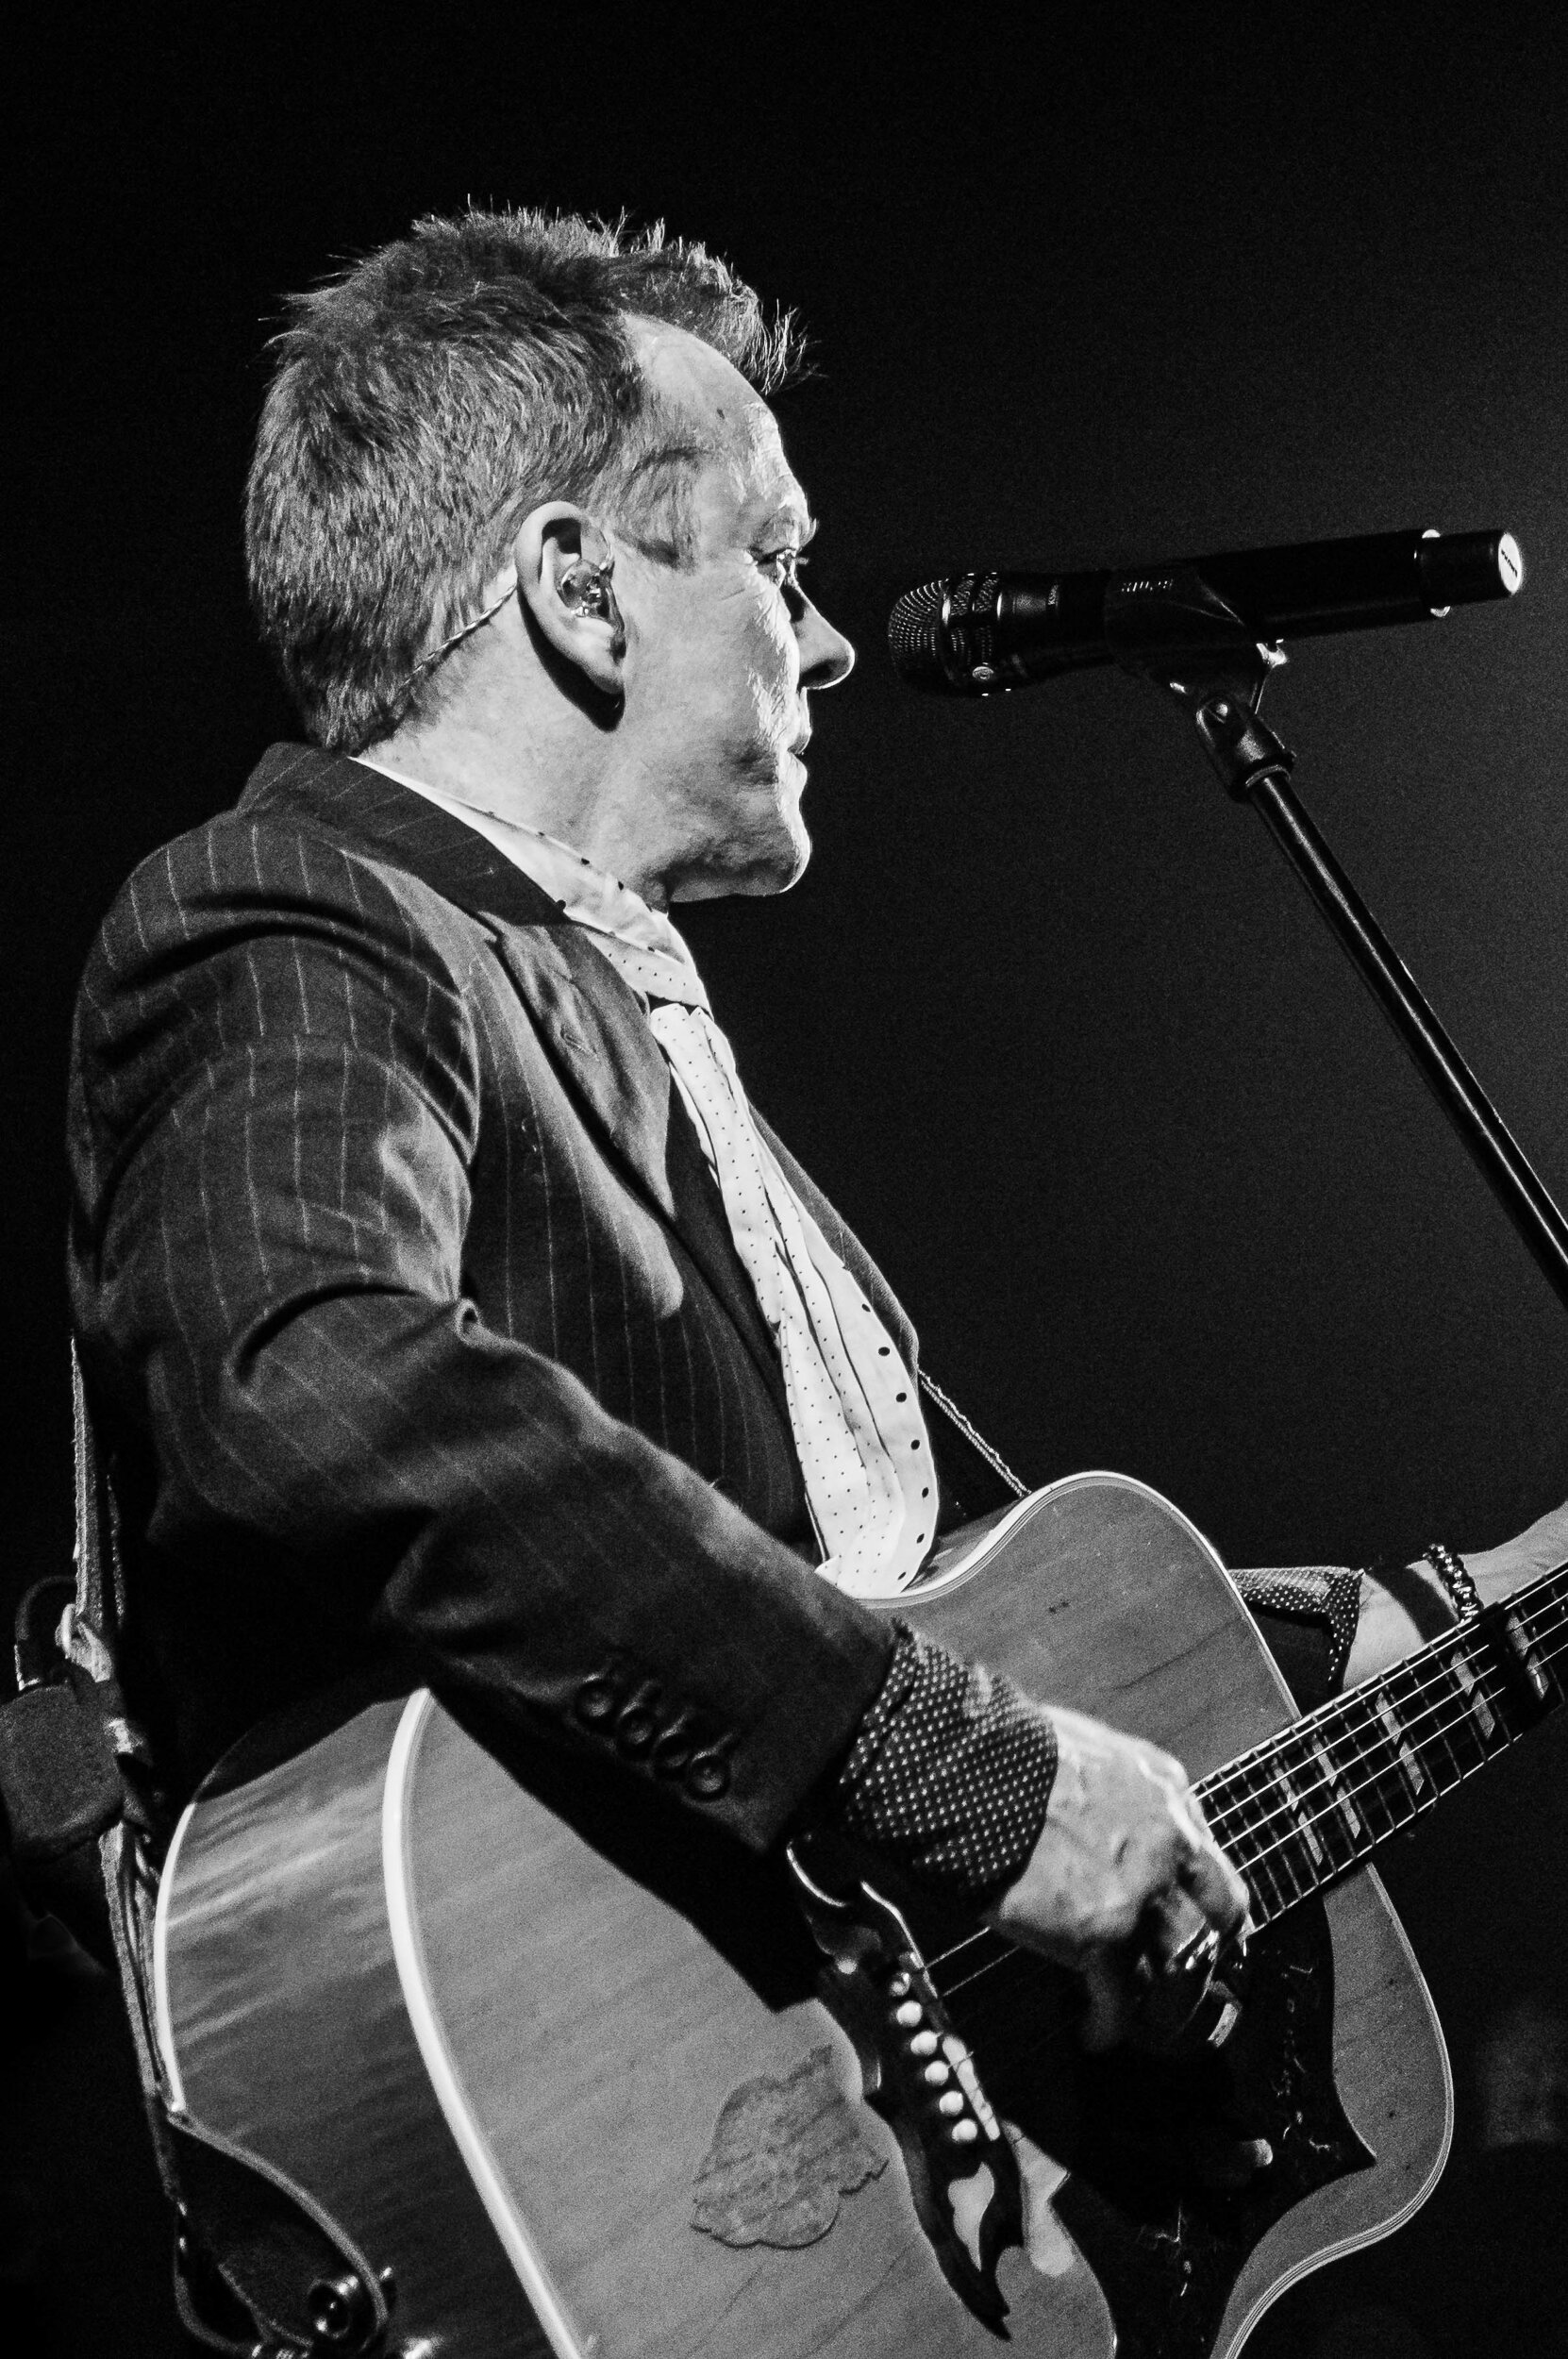 Kiefer Sutherland Live in concert at the O2 Academy Oxford. March 2020.